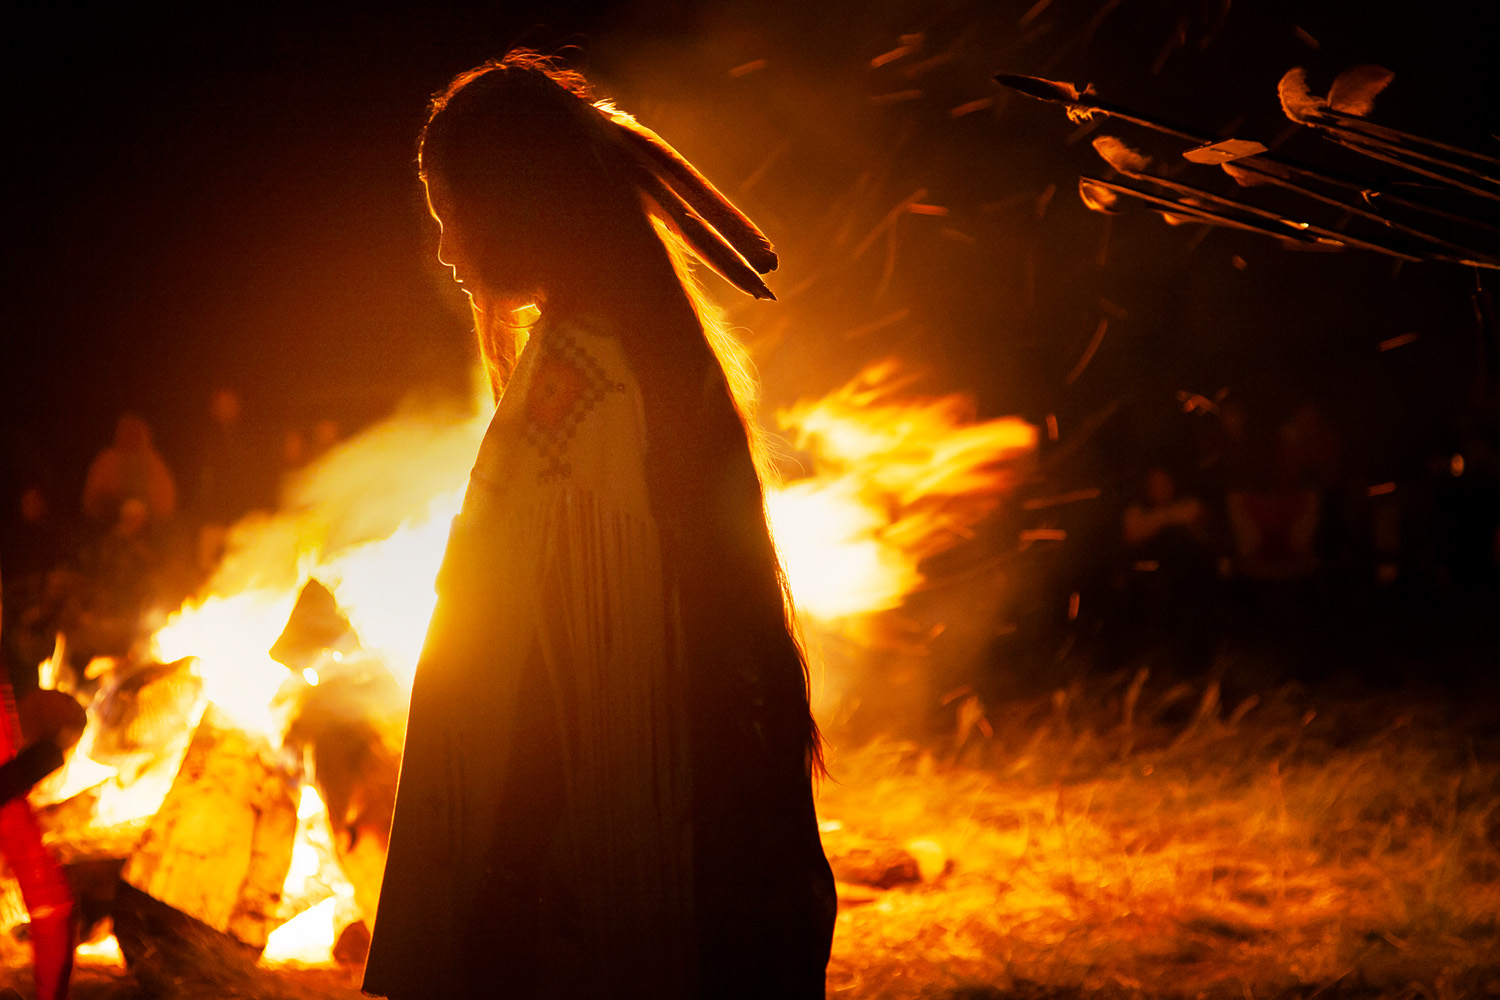 Malia Enjady, silhouetted by the campfire